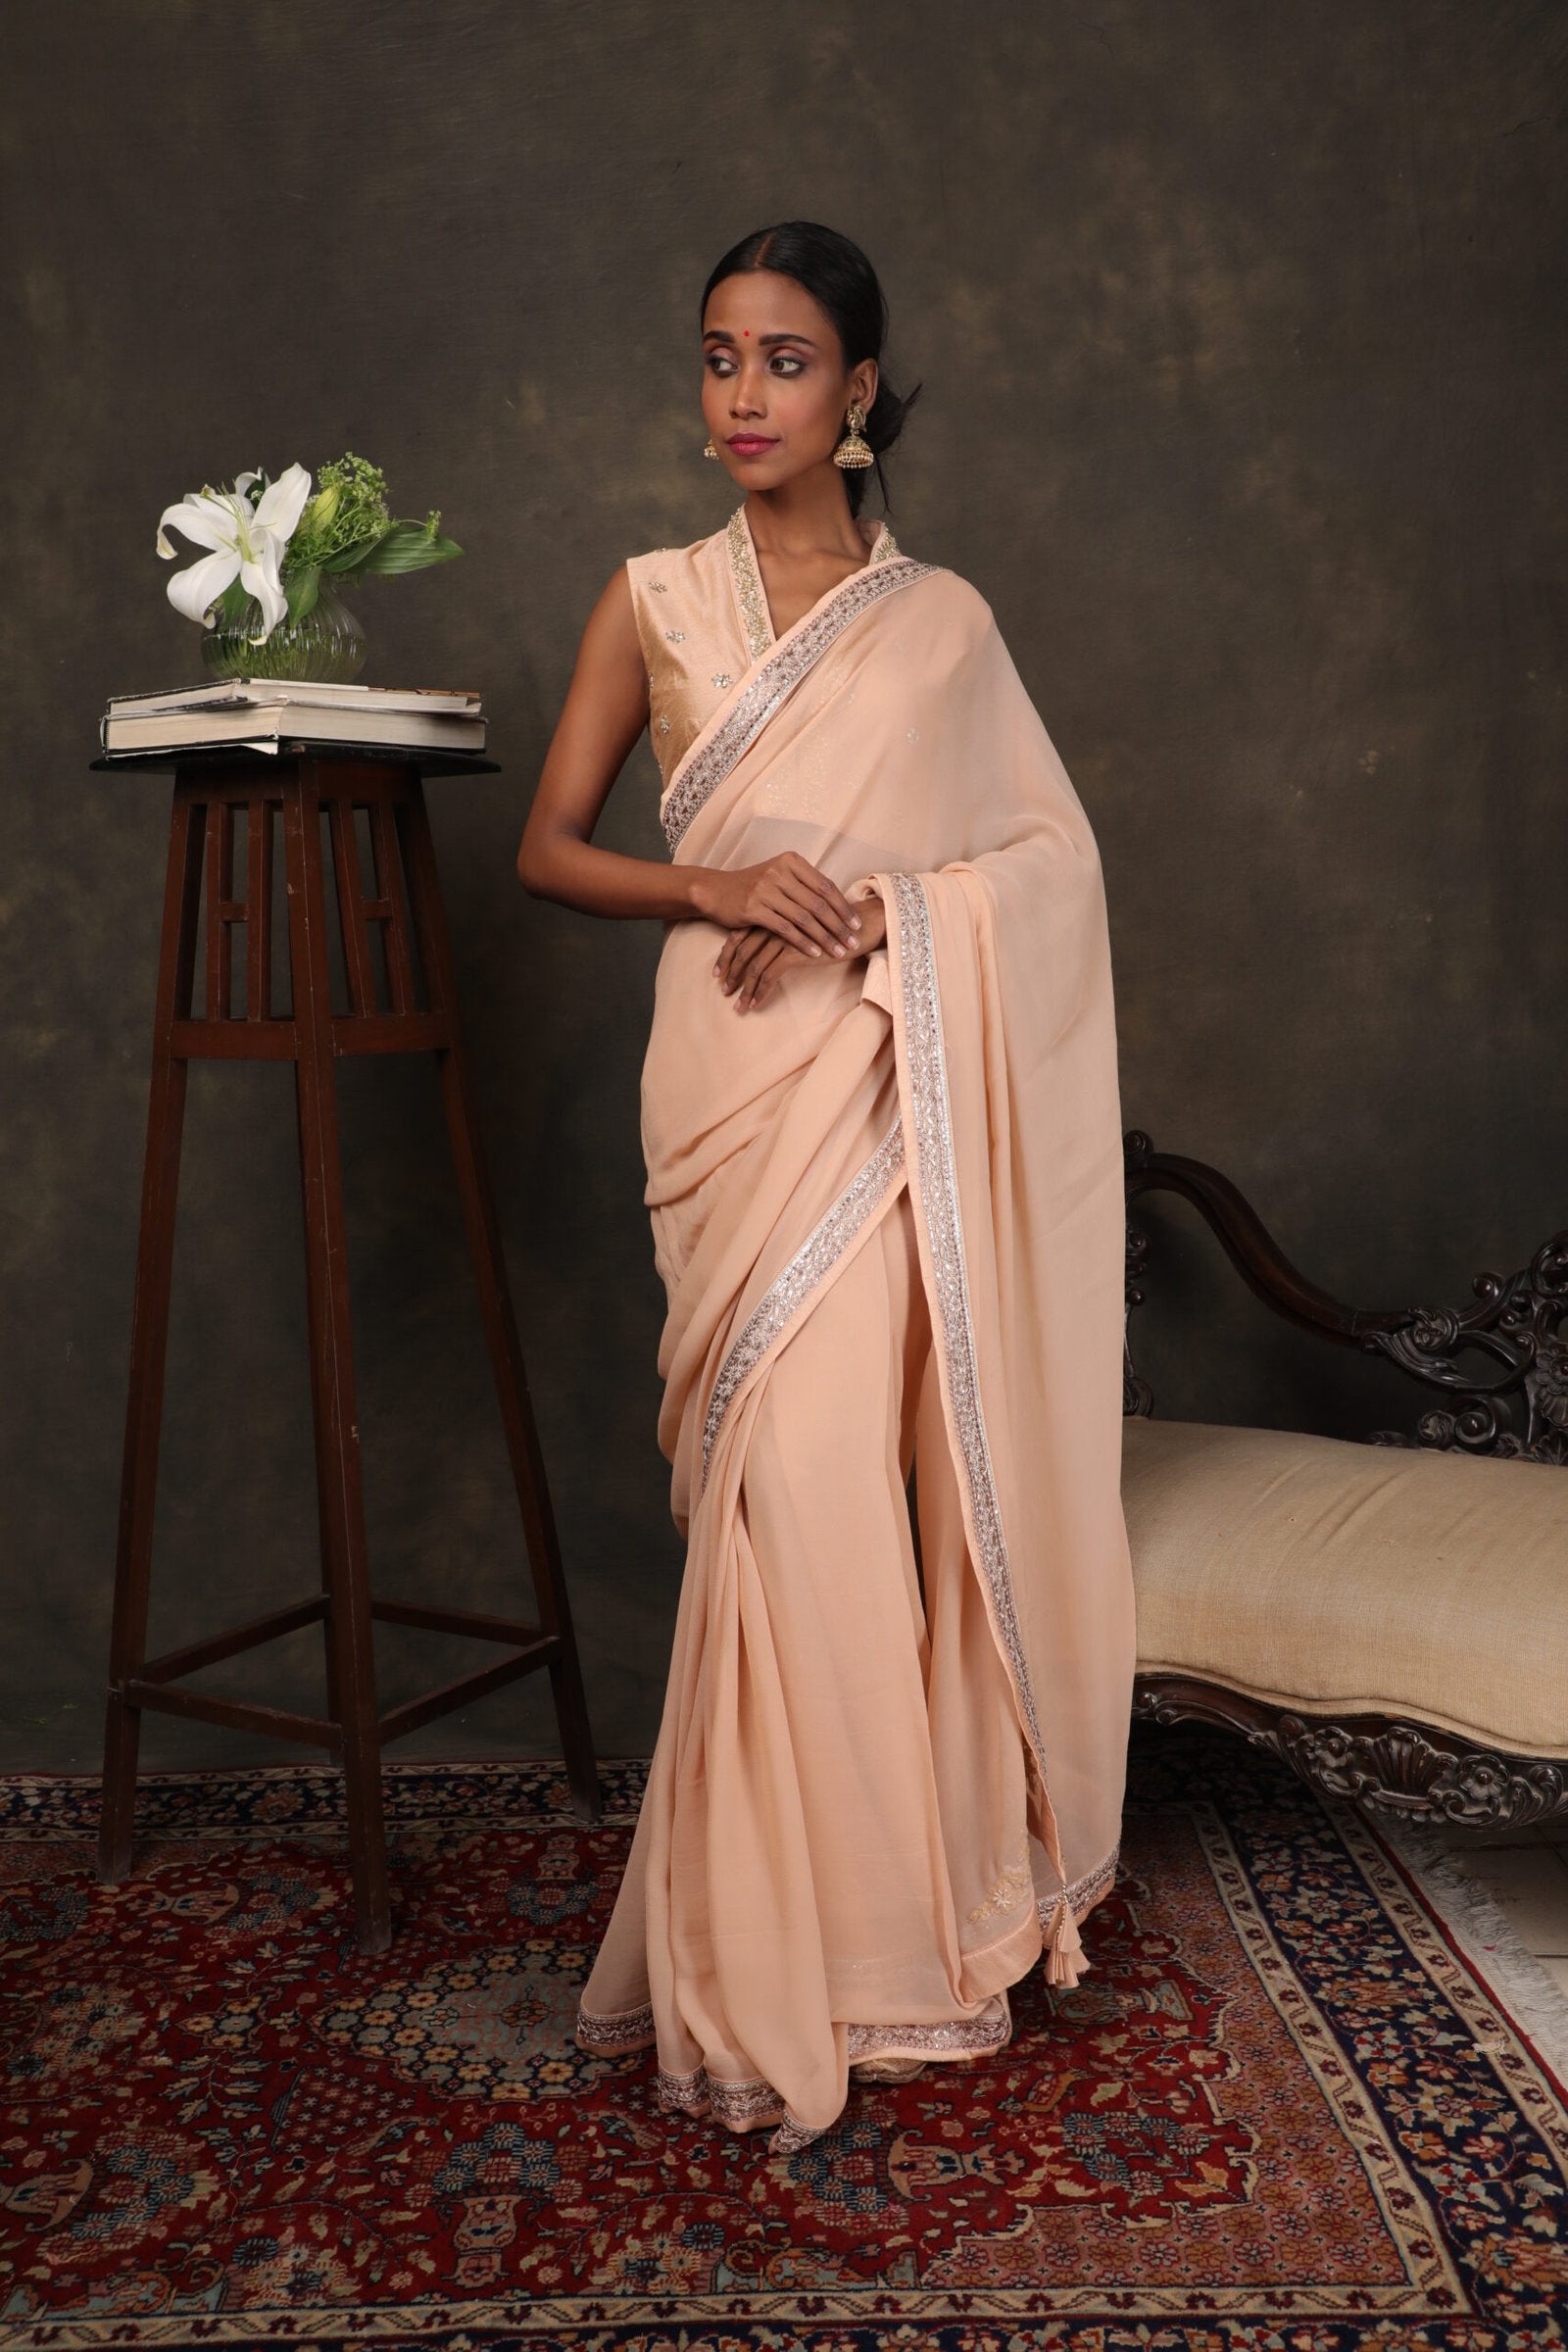 Caramel georgette saree with raw silk blouse.